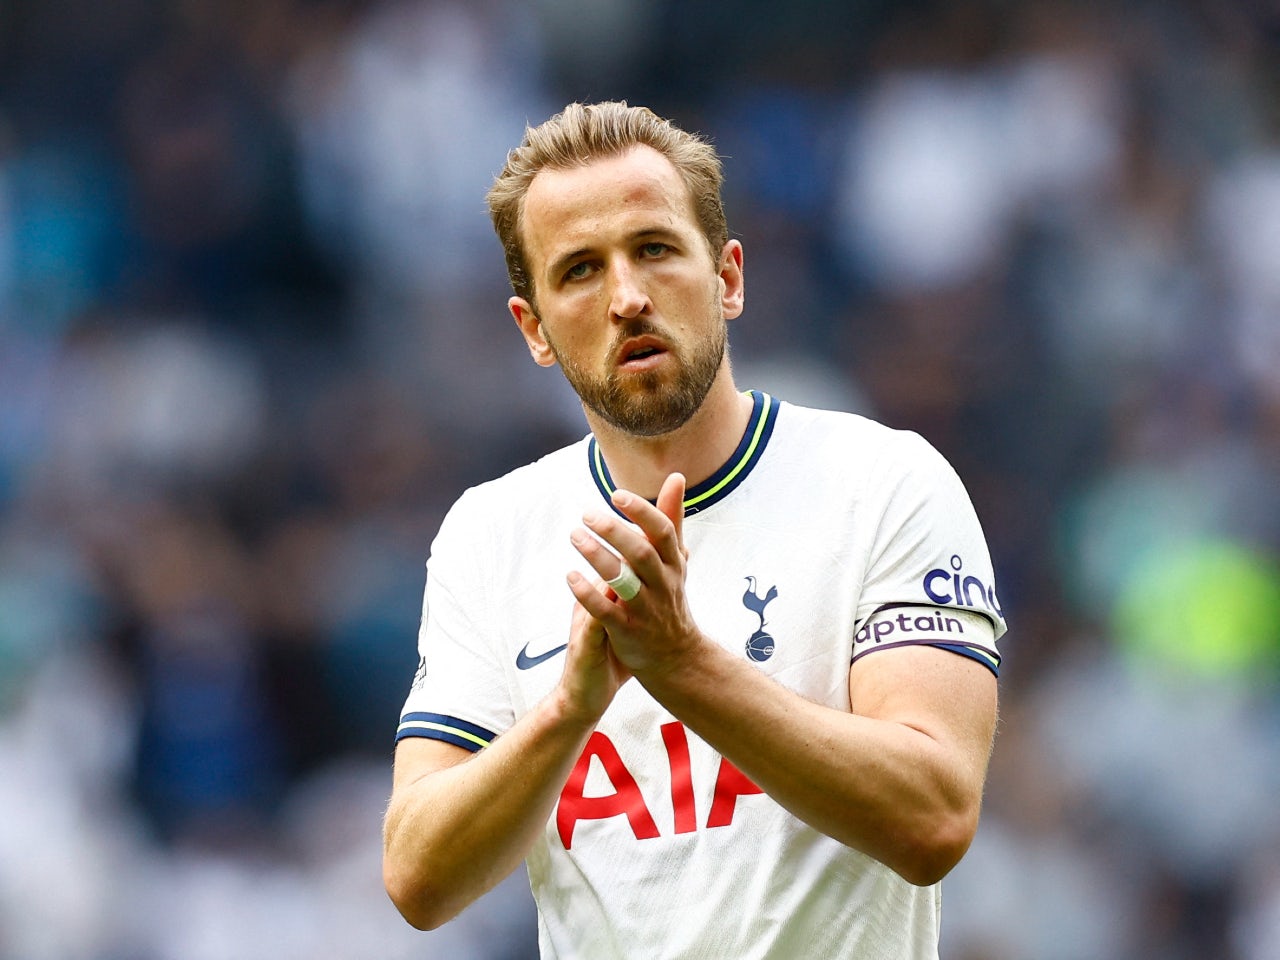 Pedro Porro: 'I would be happy to see Kane join Real Madrid'